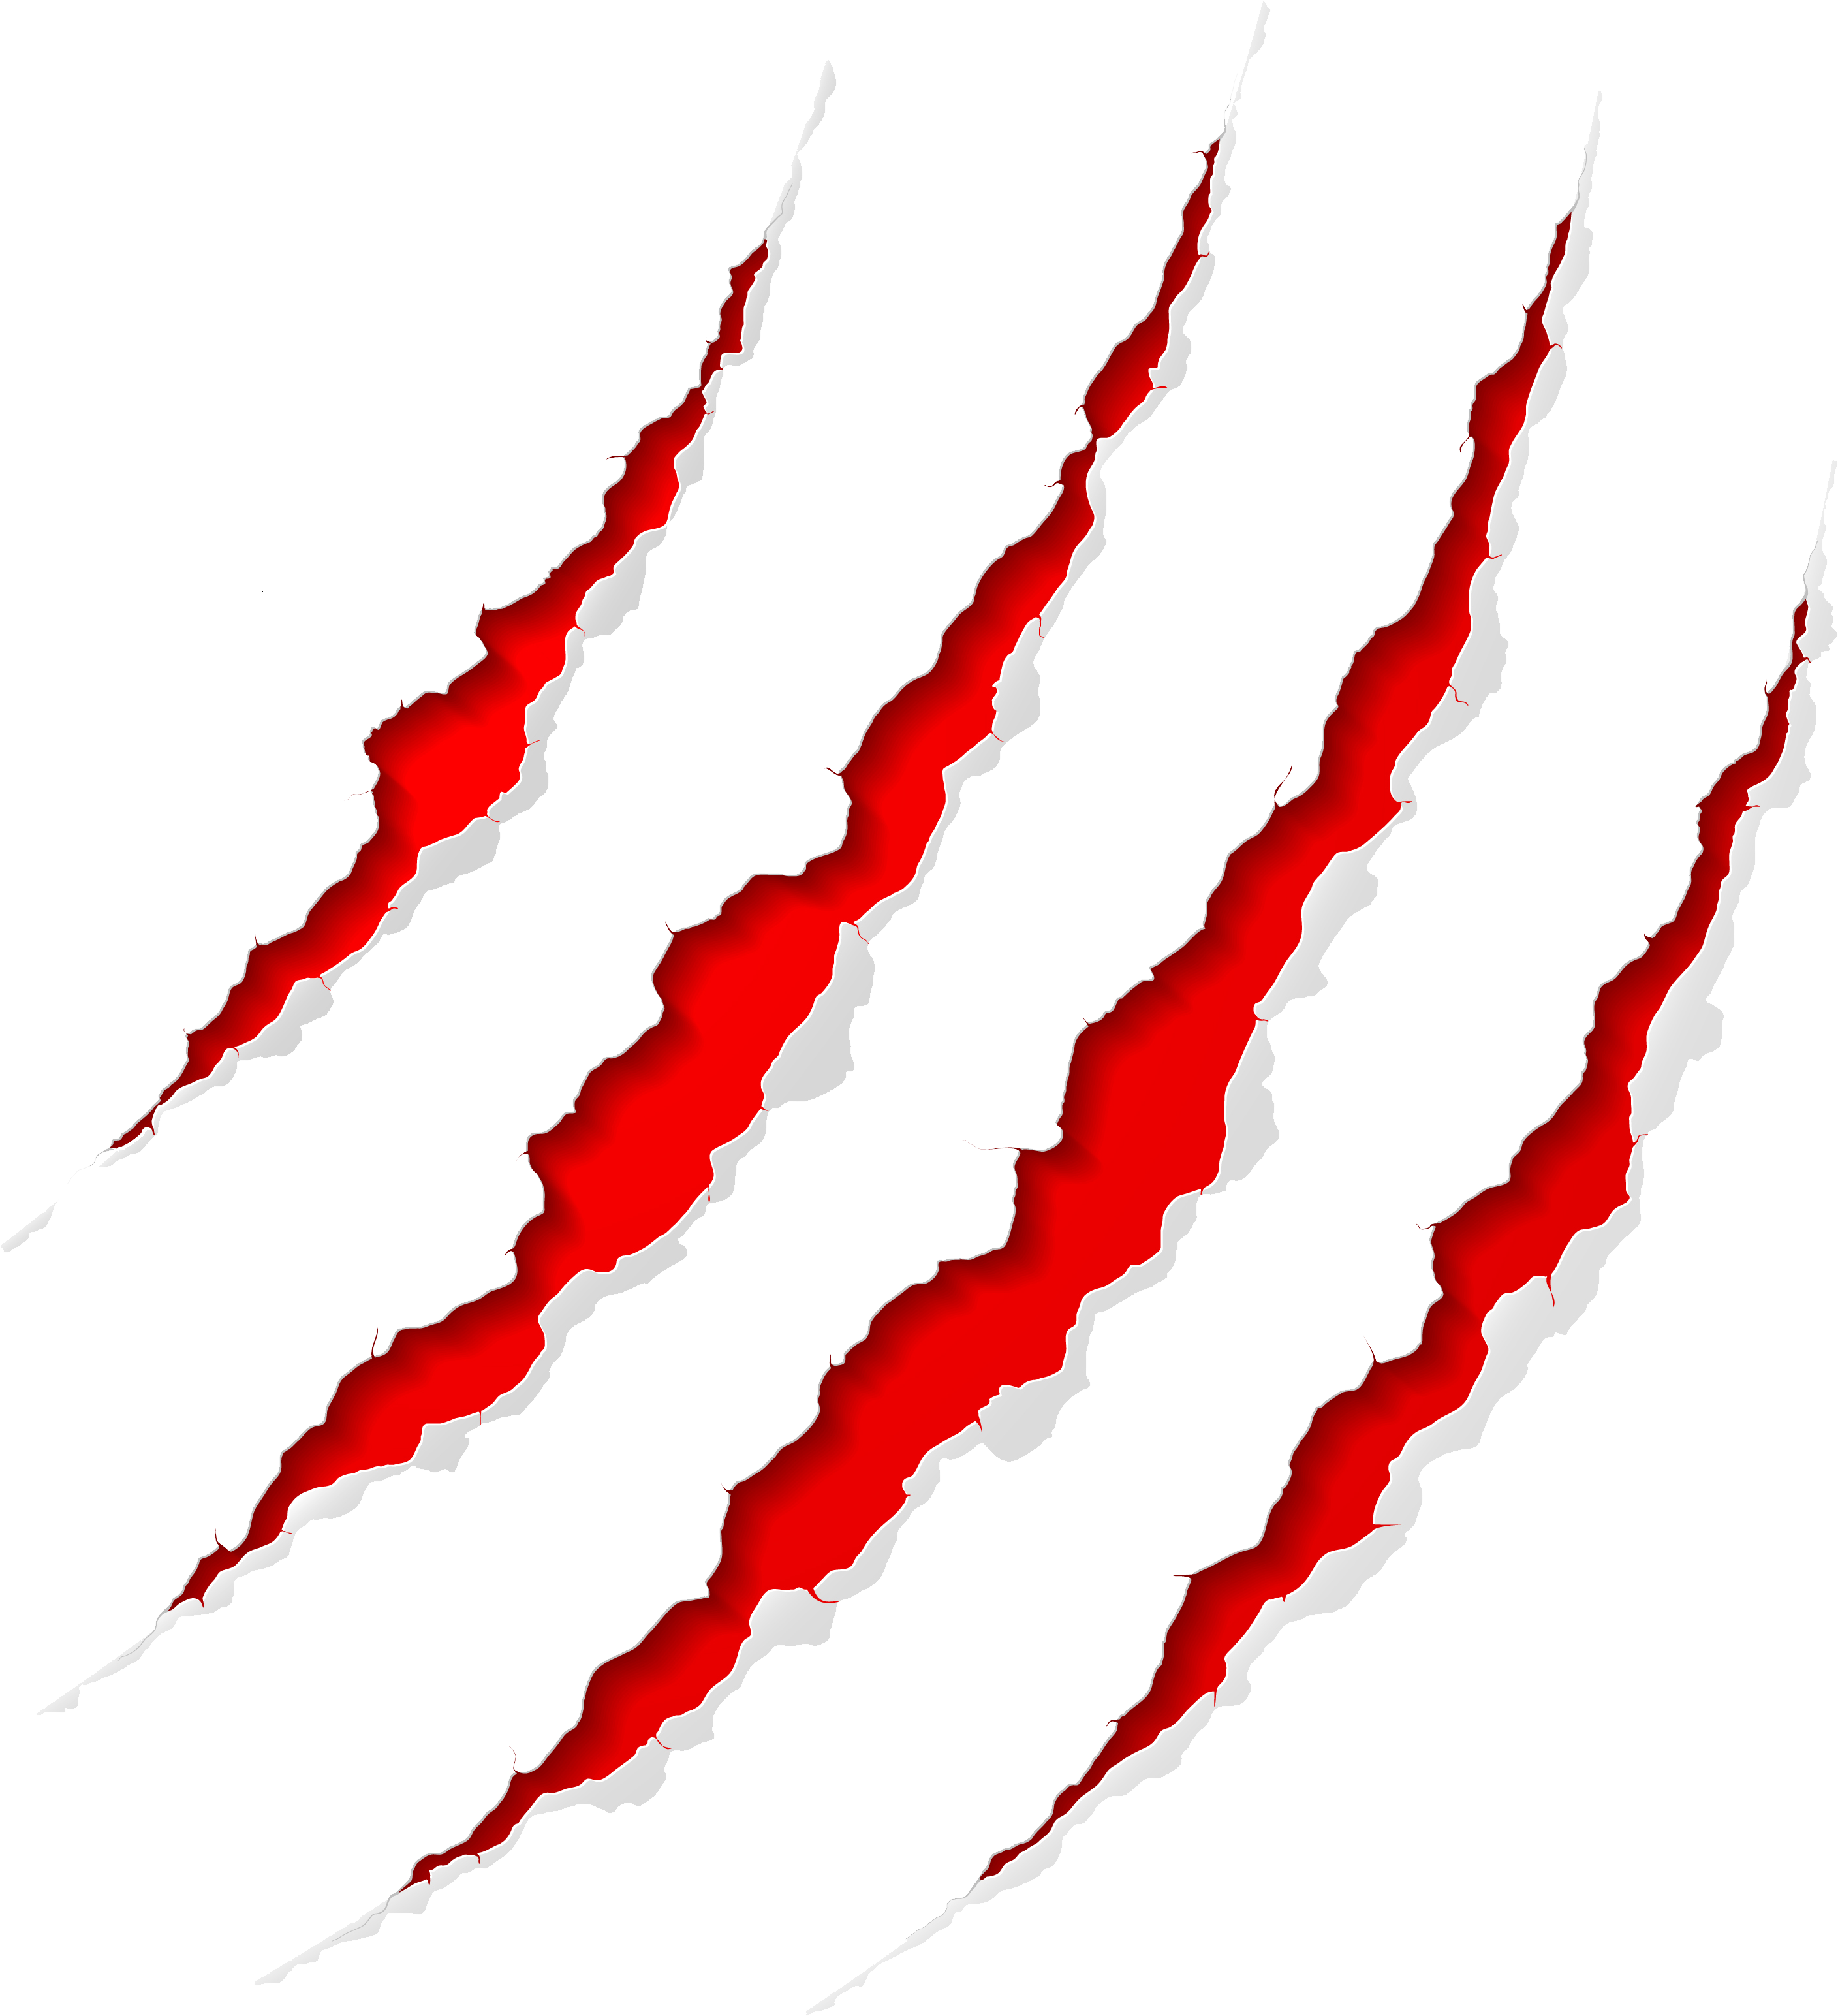 Red Monster Claw Scratch Png Image Purepng Free Transparent Cc0 Png Image Library